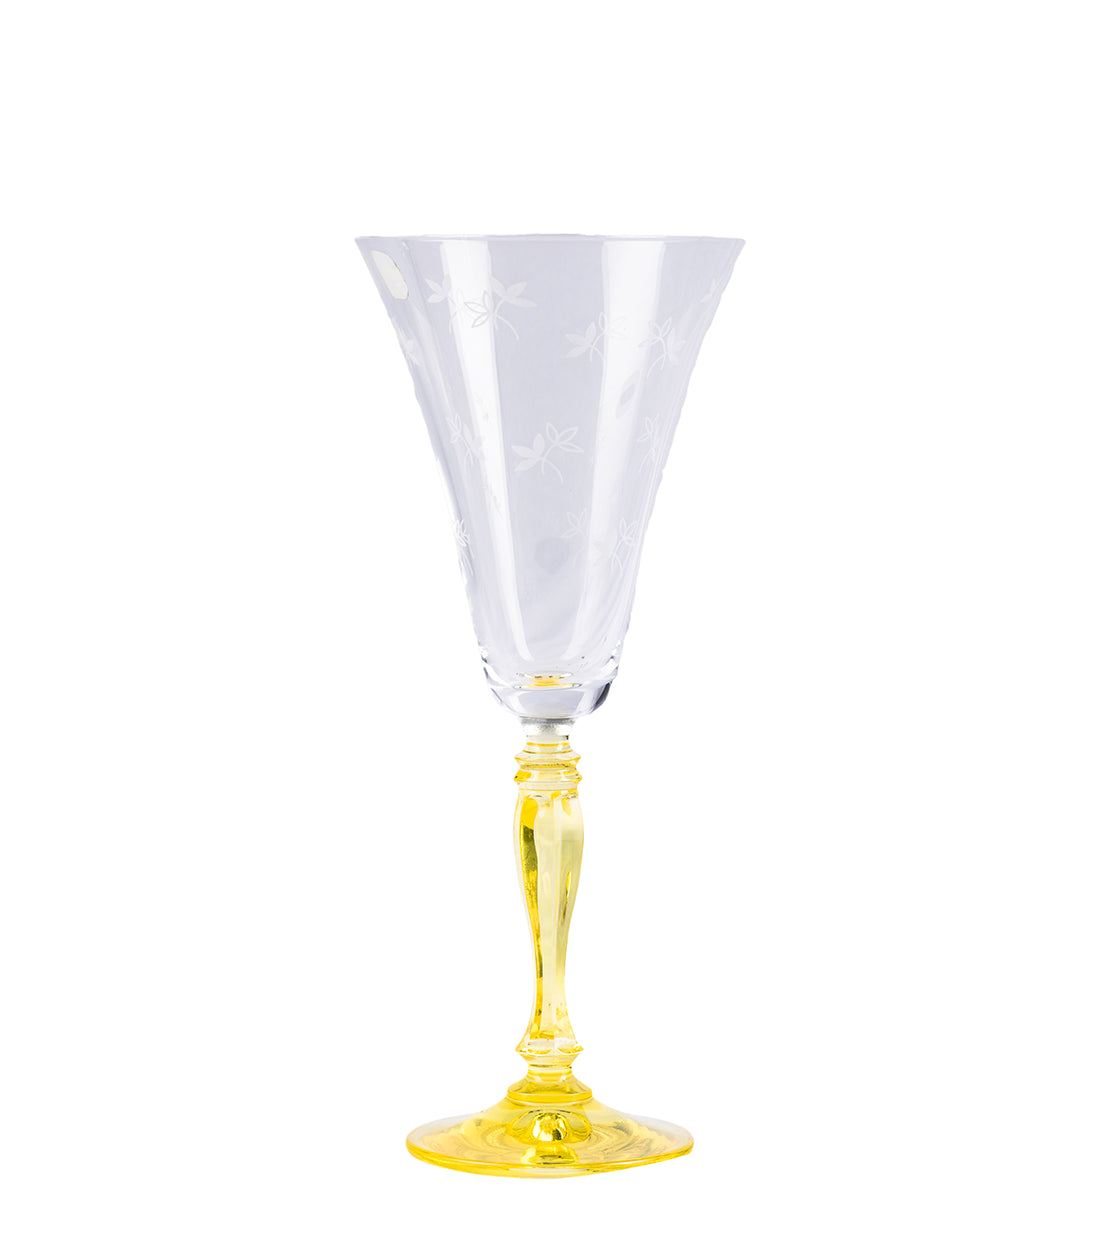 CAESAR CRYSTAL BOHEMIAE - Bell Shaped Crystal Cut Glass in Yellow Color - Bespoke Cocktail Yellow Flute Glass with Fine Detailing.